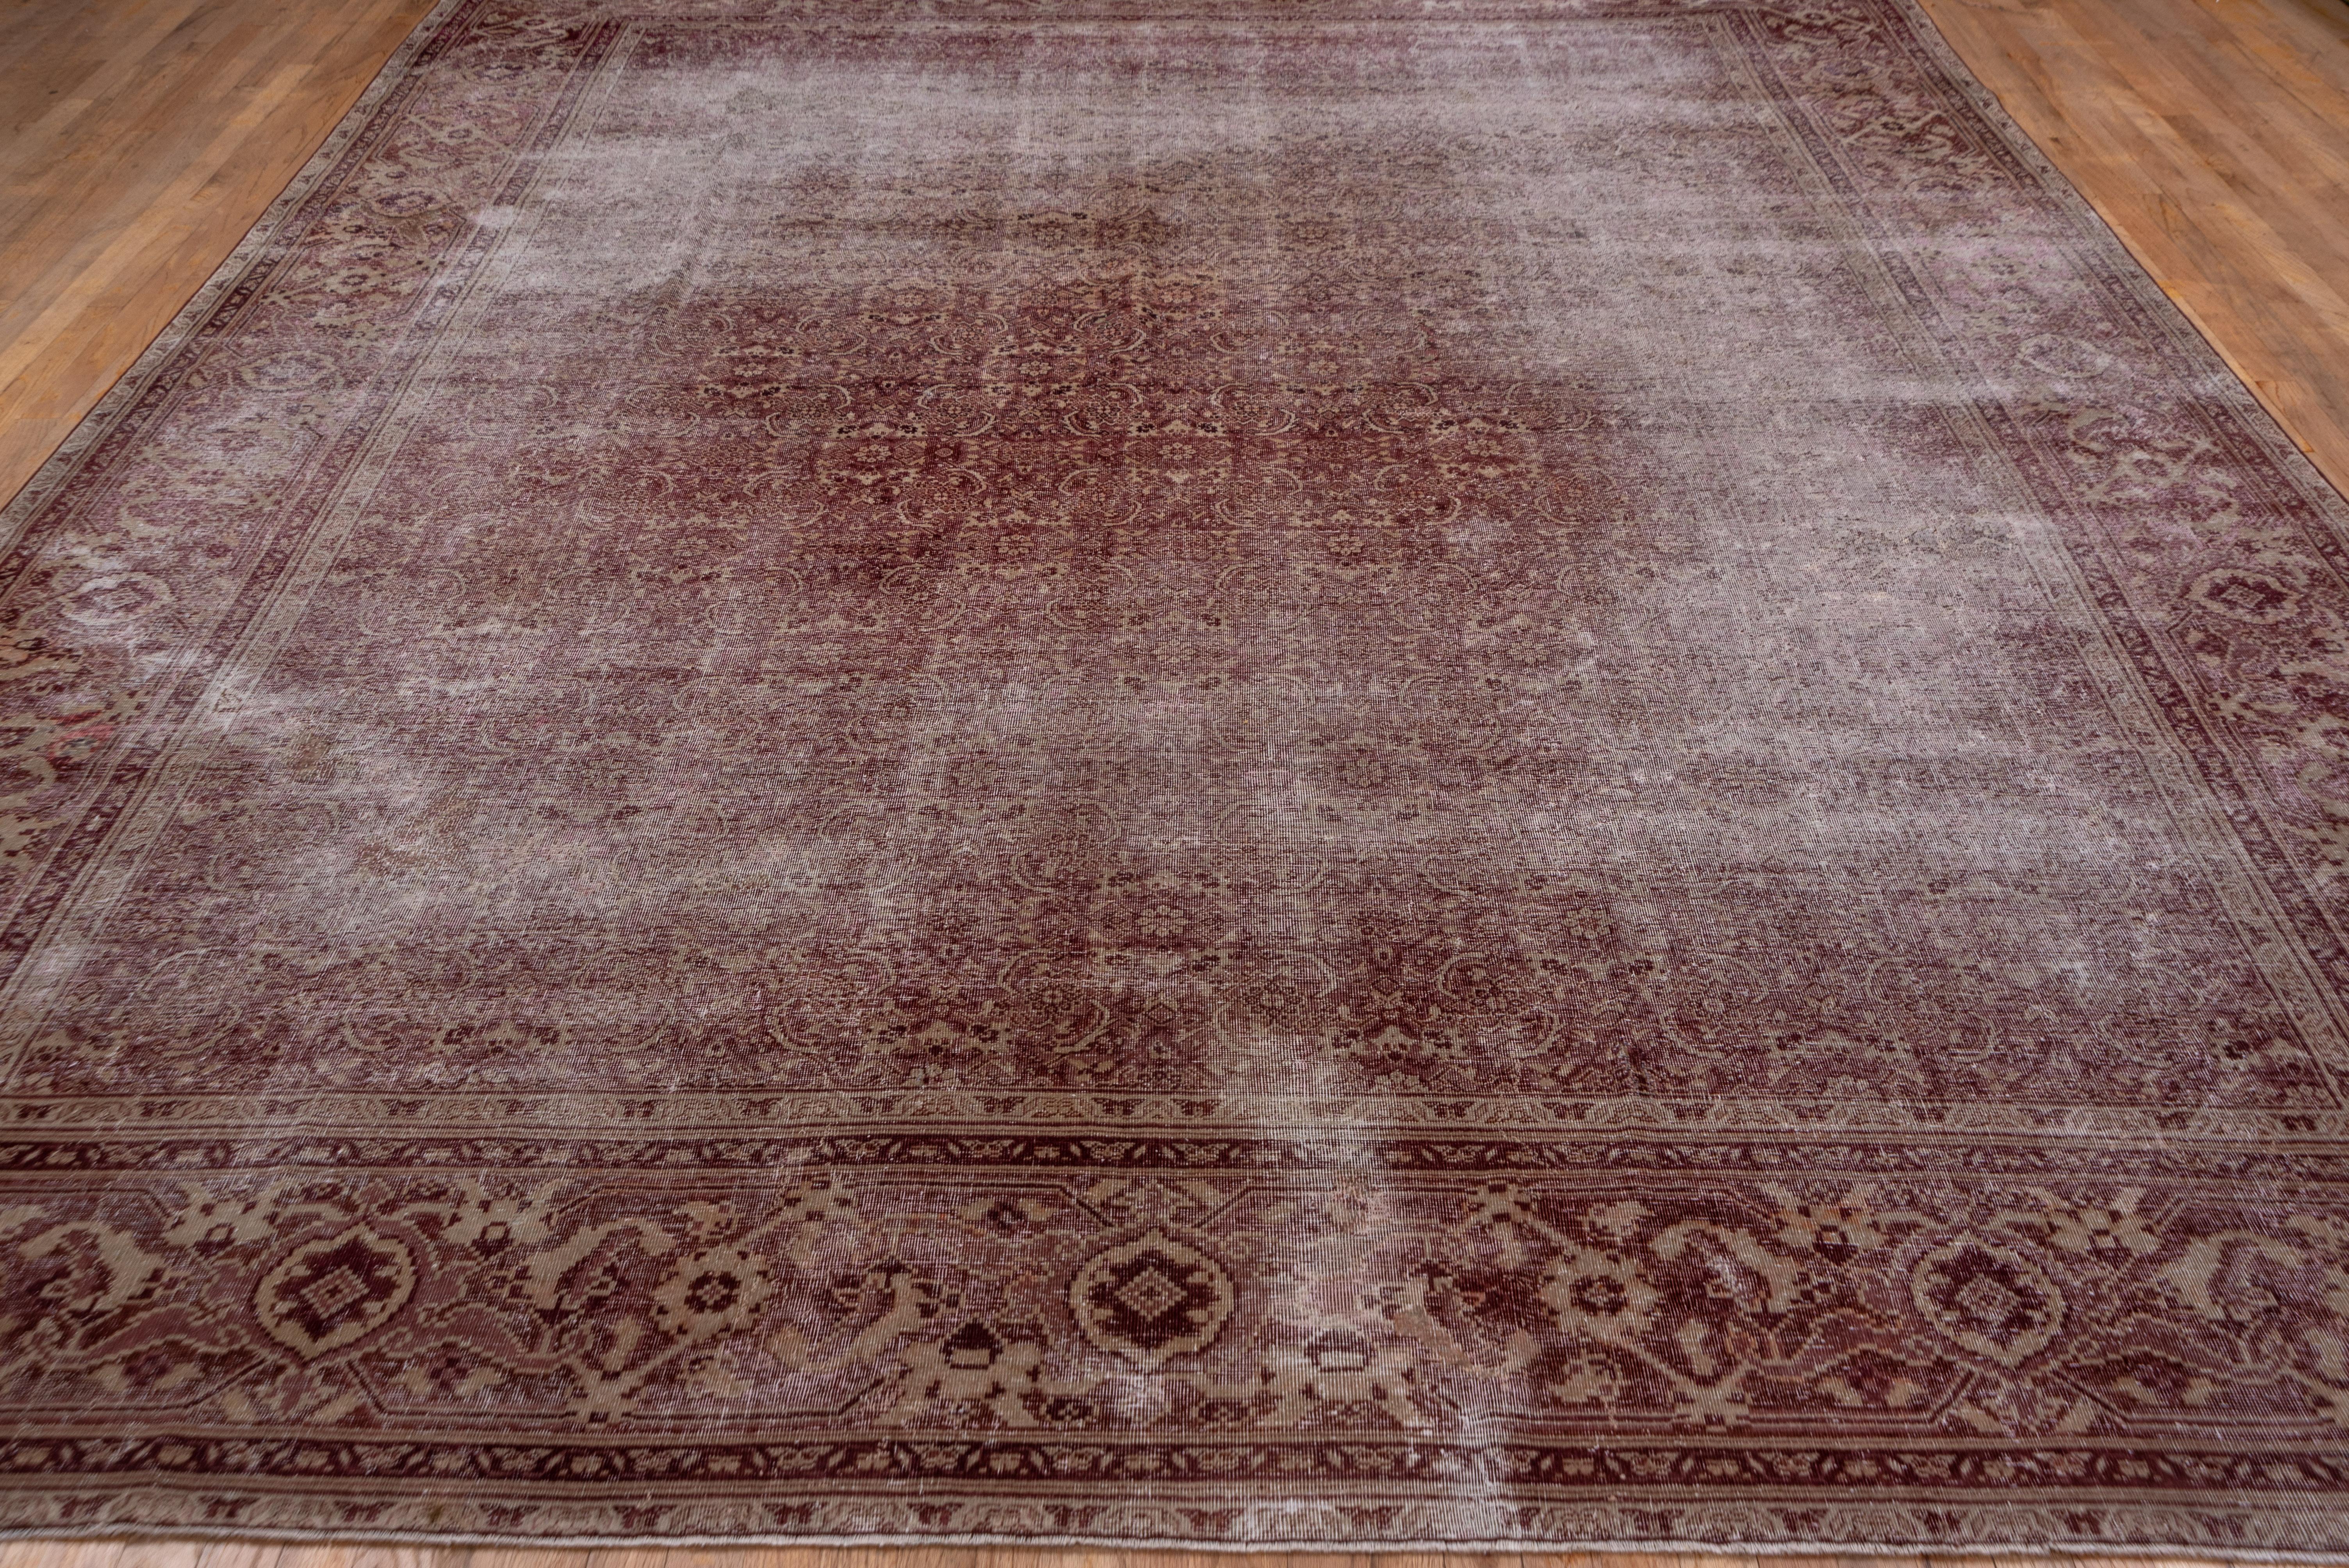 Distressed Antique Indian Amritzar Rug, Burgundy and Brown Tones In Good Condition For Sale In New York, NY